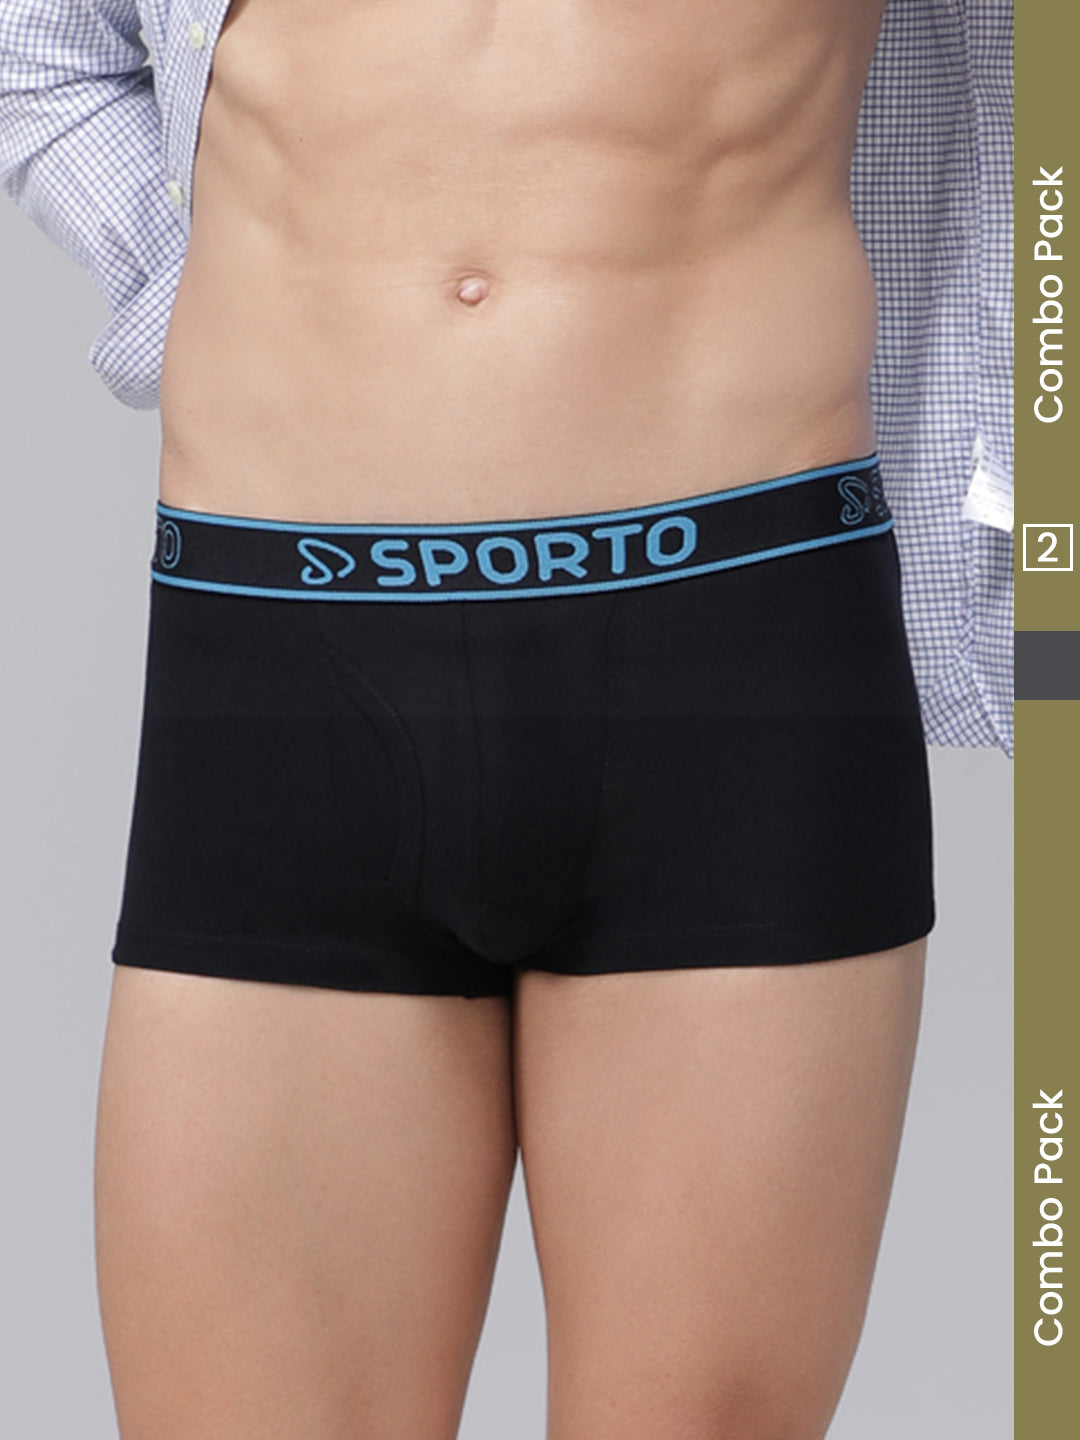 Sporto Men's Square Trunks (Pack Of 2) - Black and Charcoal